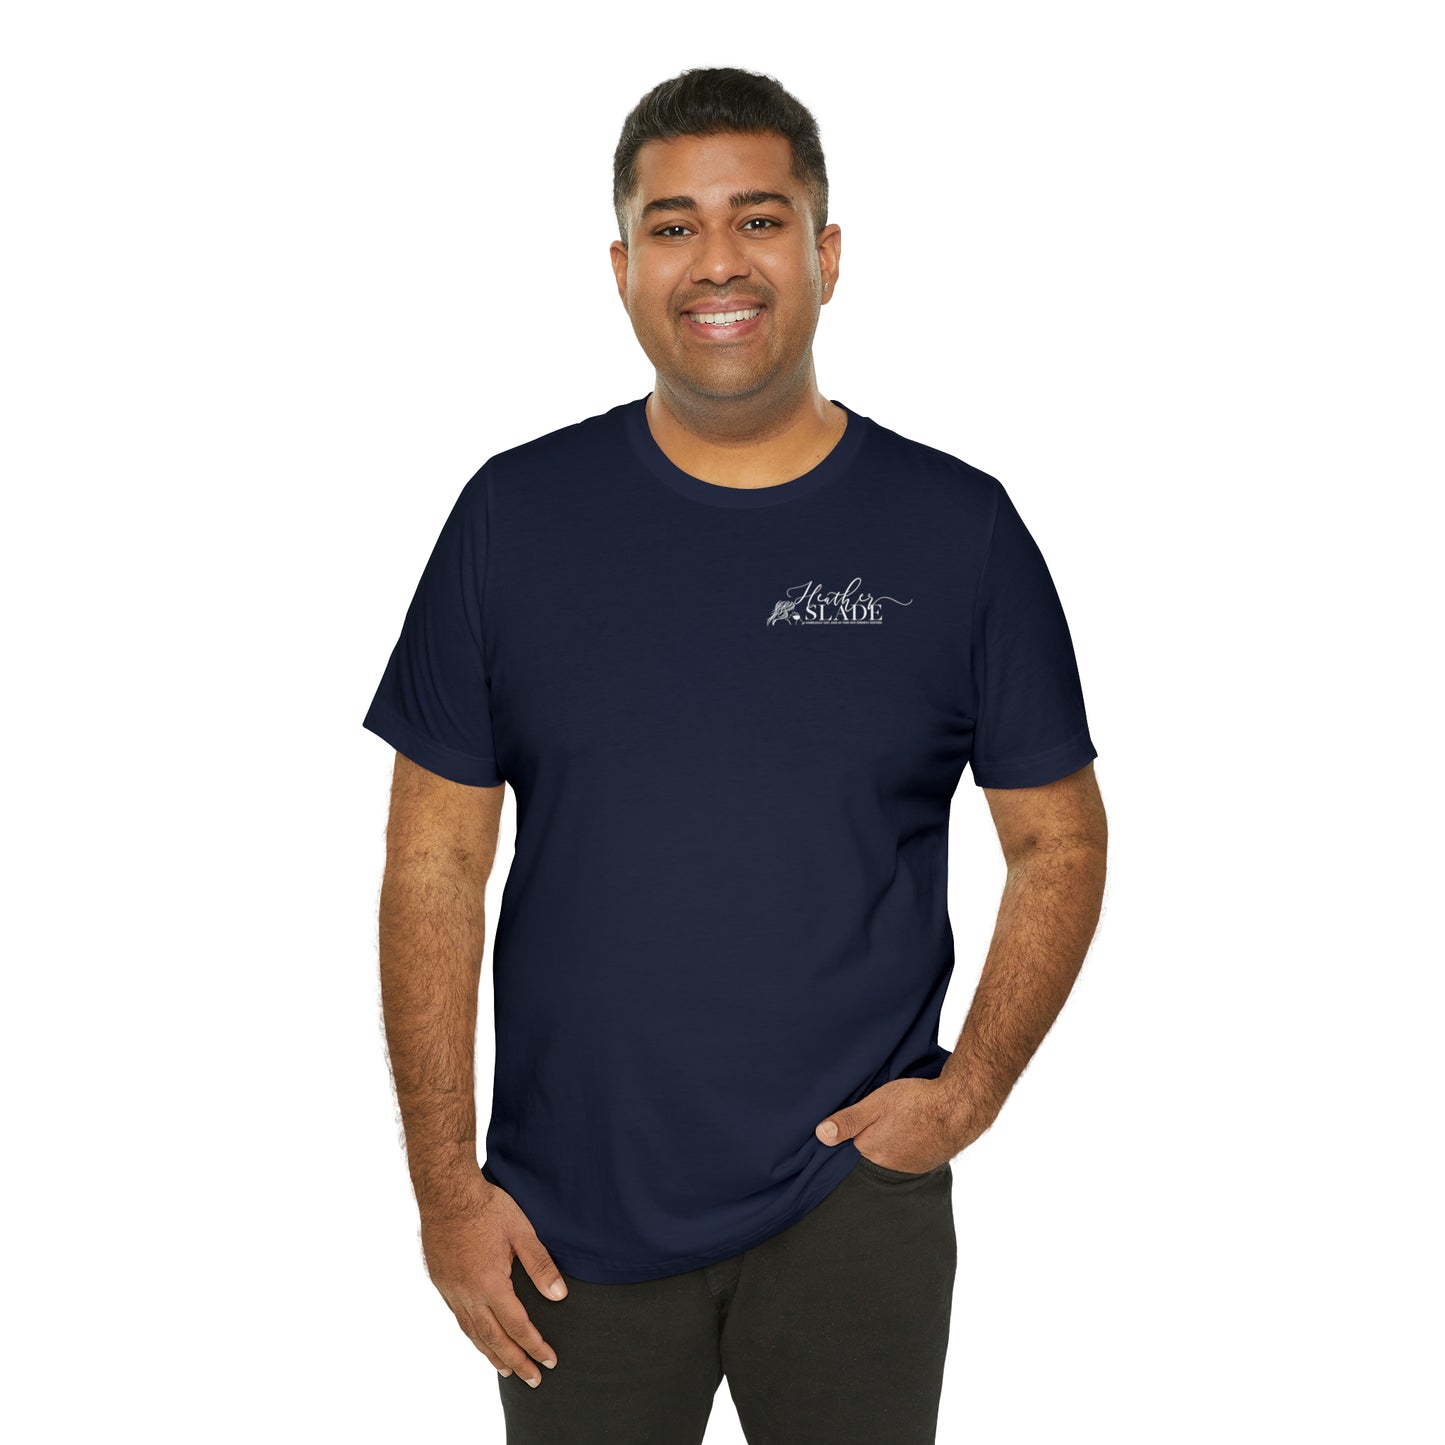 K19 Security Solutions Team Two Jersey Short Sleeve Tee